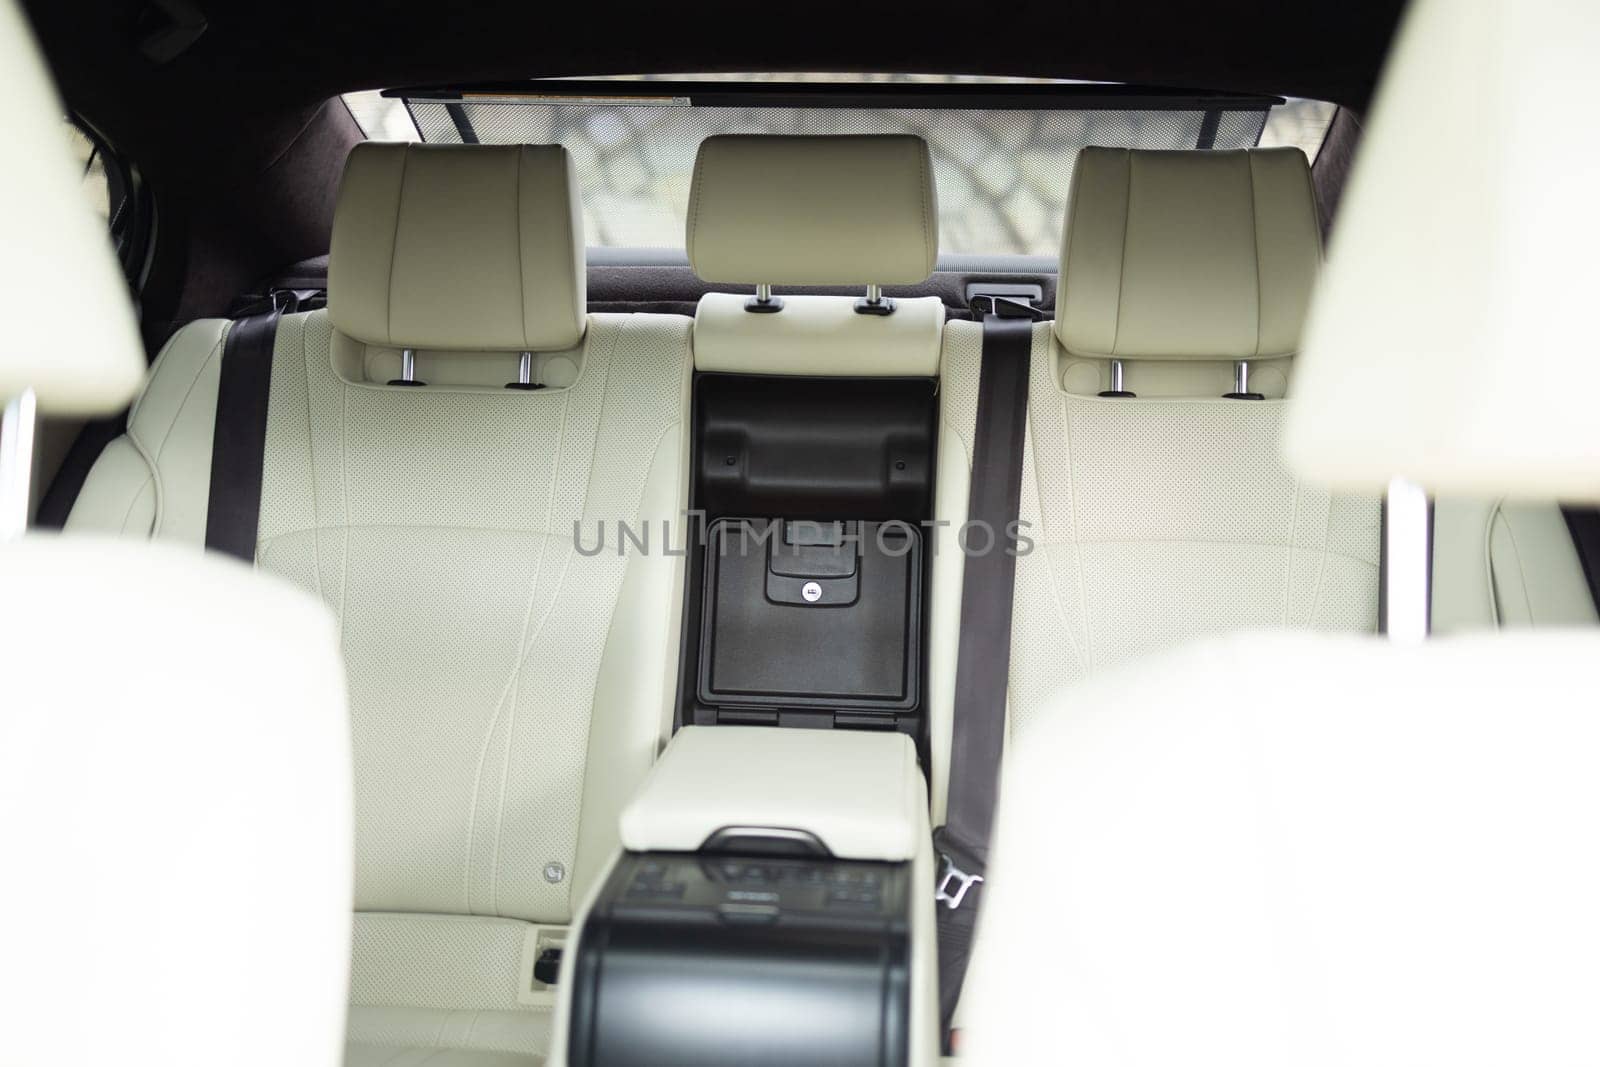 New car inside. Car cleaning theme. Luxury car rear leather seats row. Interior of new modern clean expensive car. Passenger seats with leather. Closeup details.